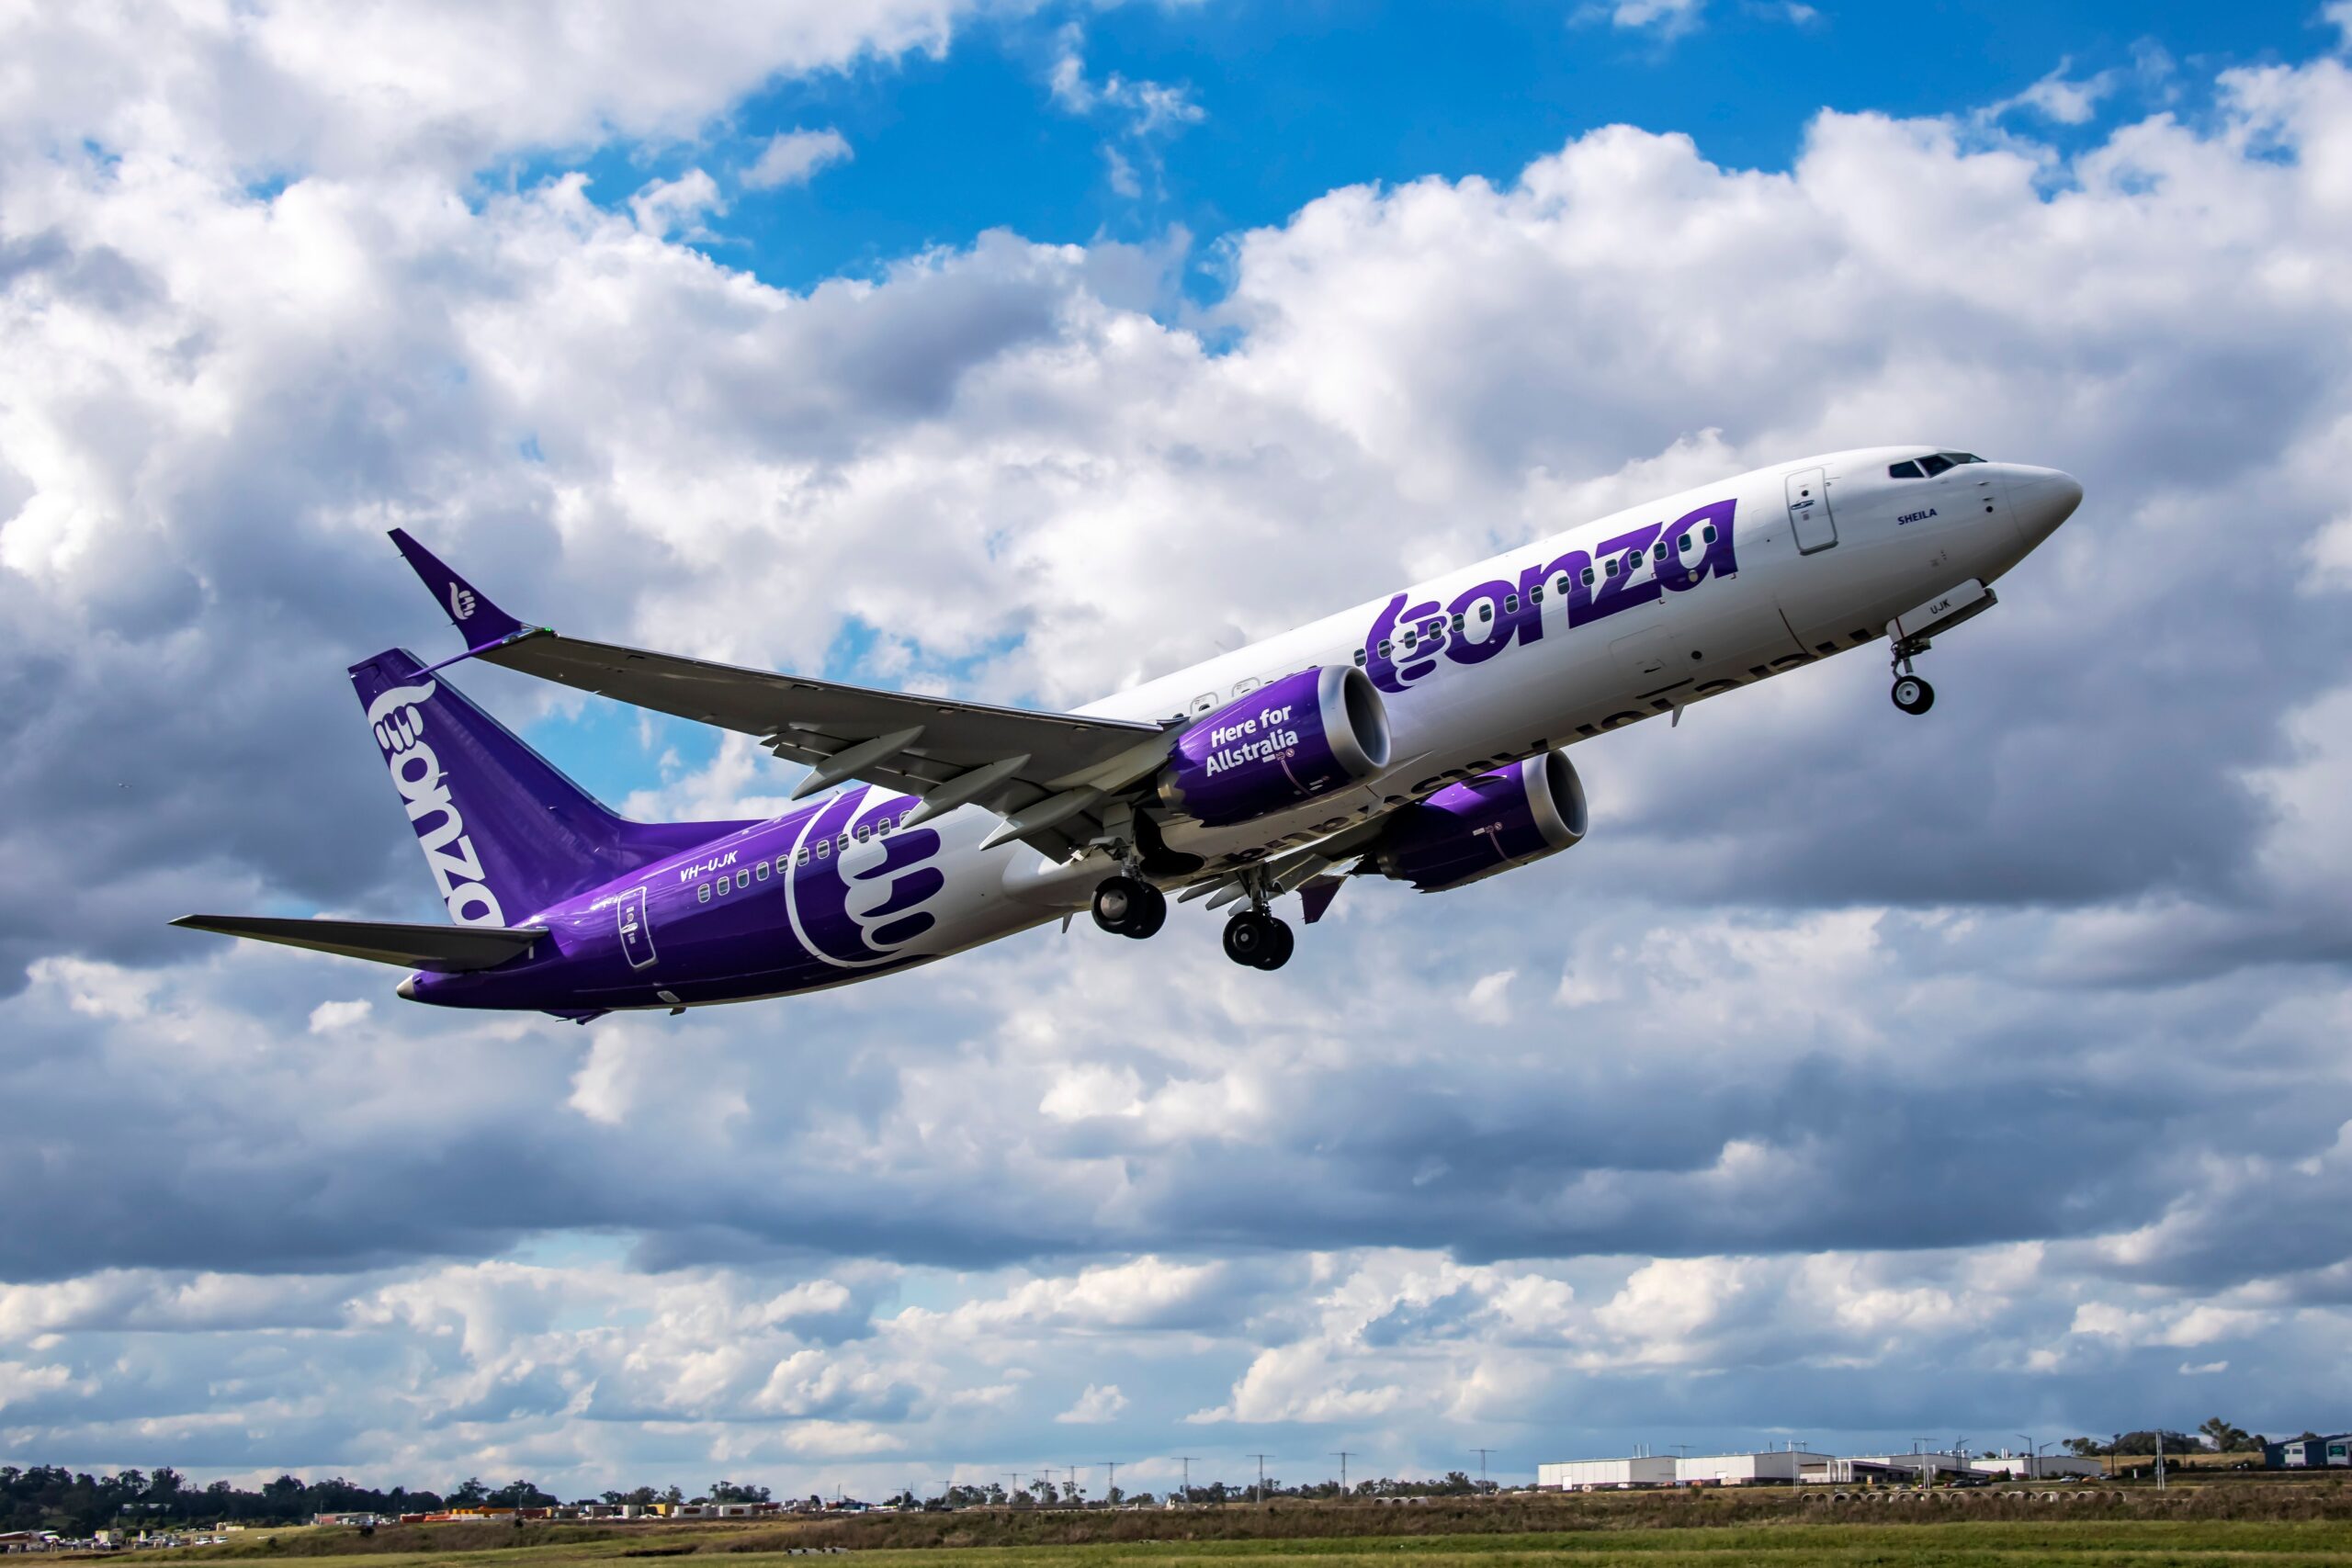 Photo of: Bonza Airlines Boeing 737 MAX // Bonza Airlines hoto-credit-Garry-Wilkinson-Photography.jpg